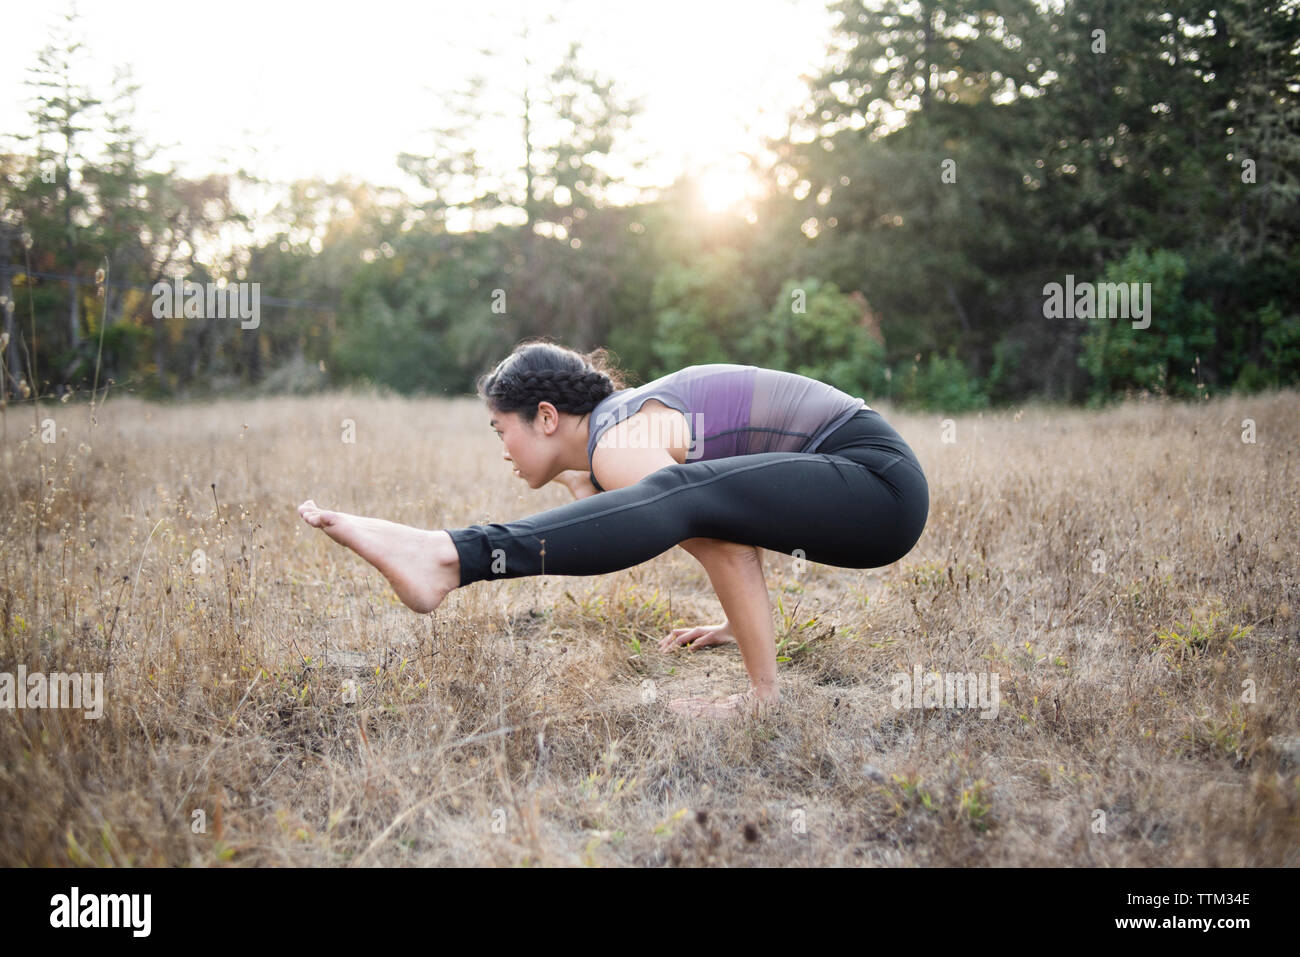 Side view of woman practicing yoga posture at field Stock Photo